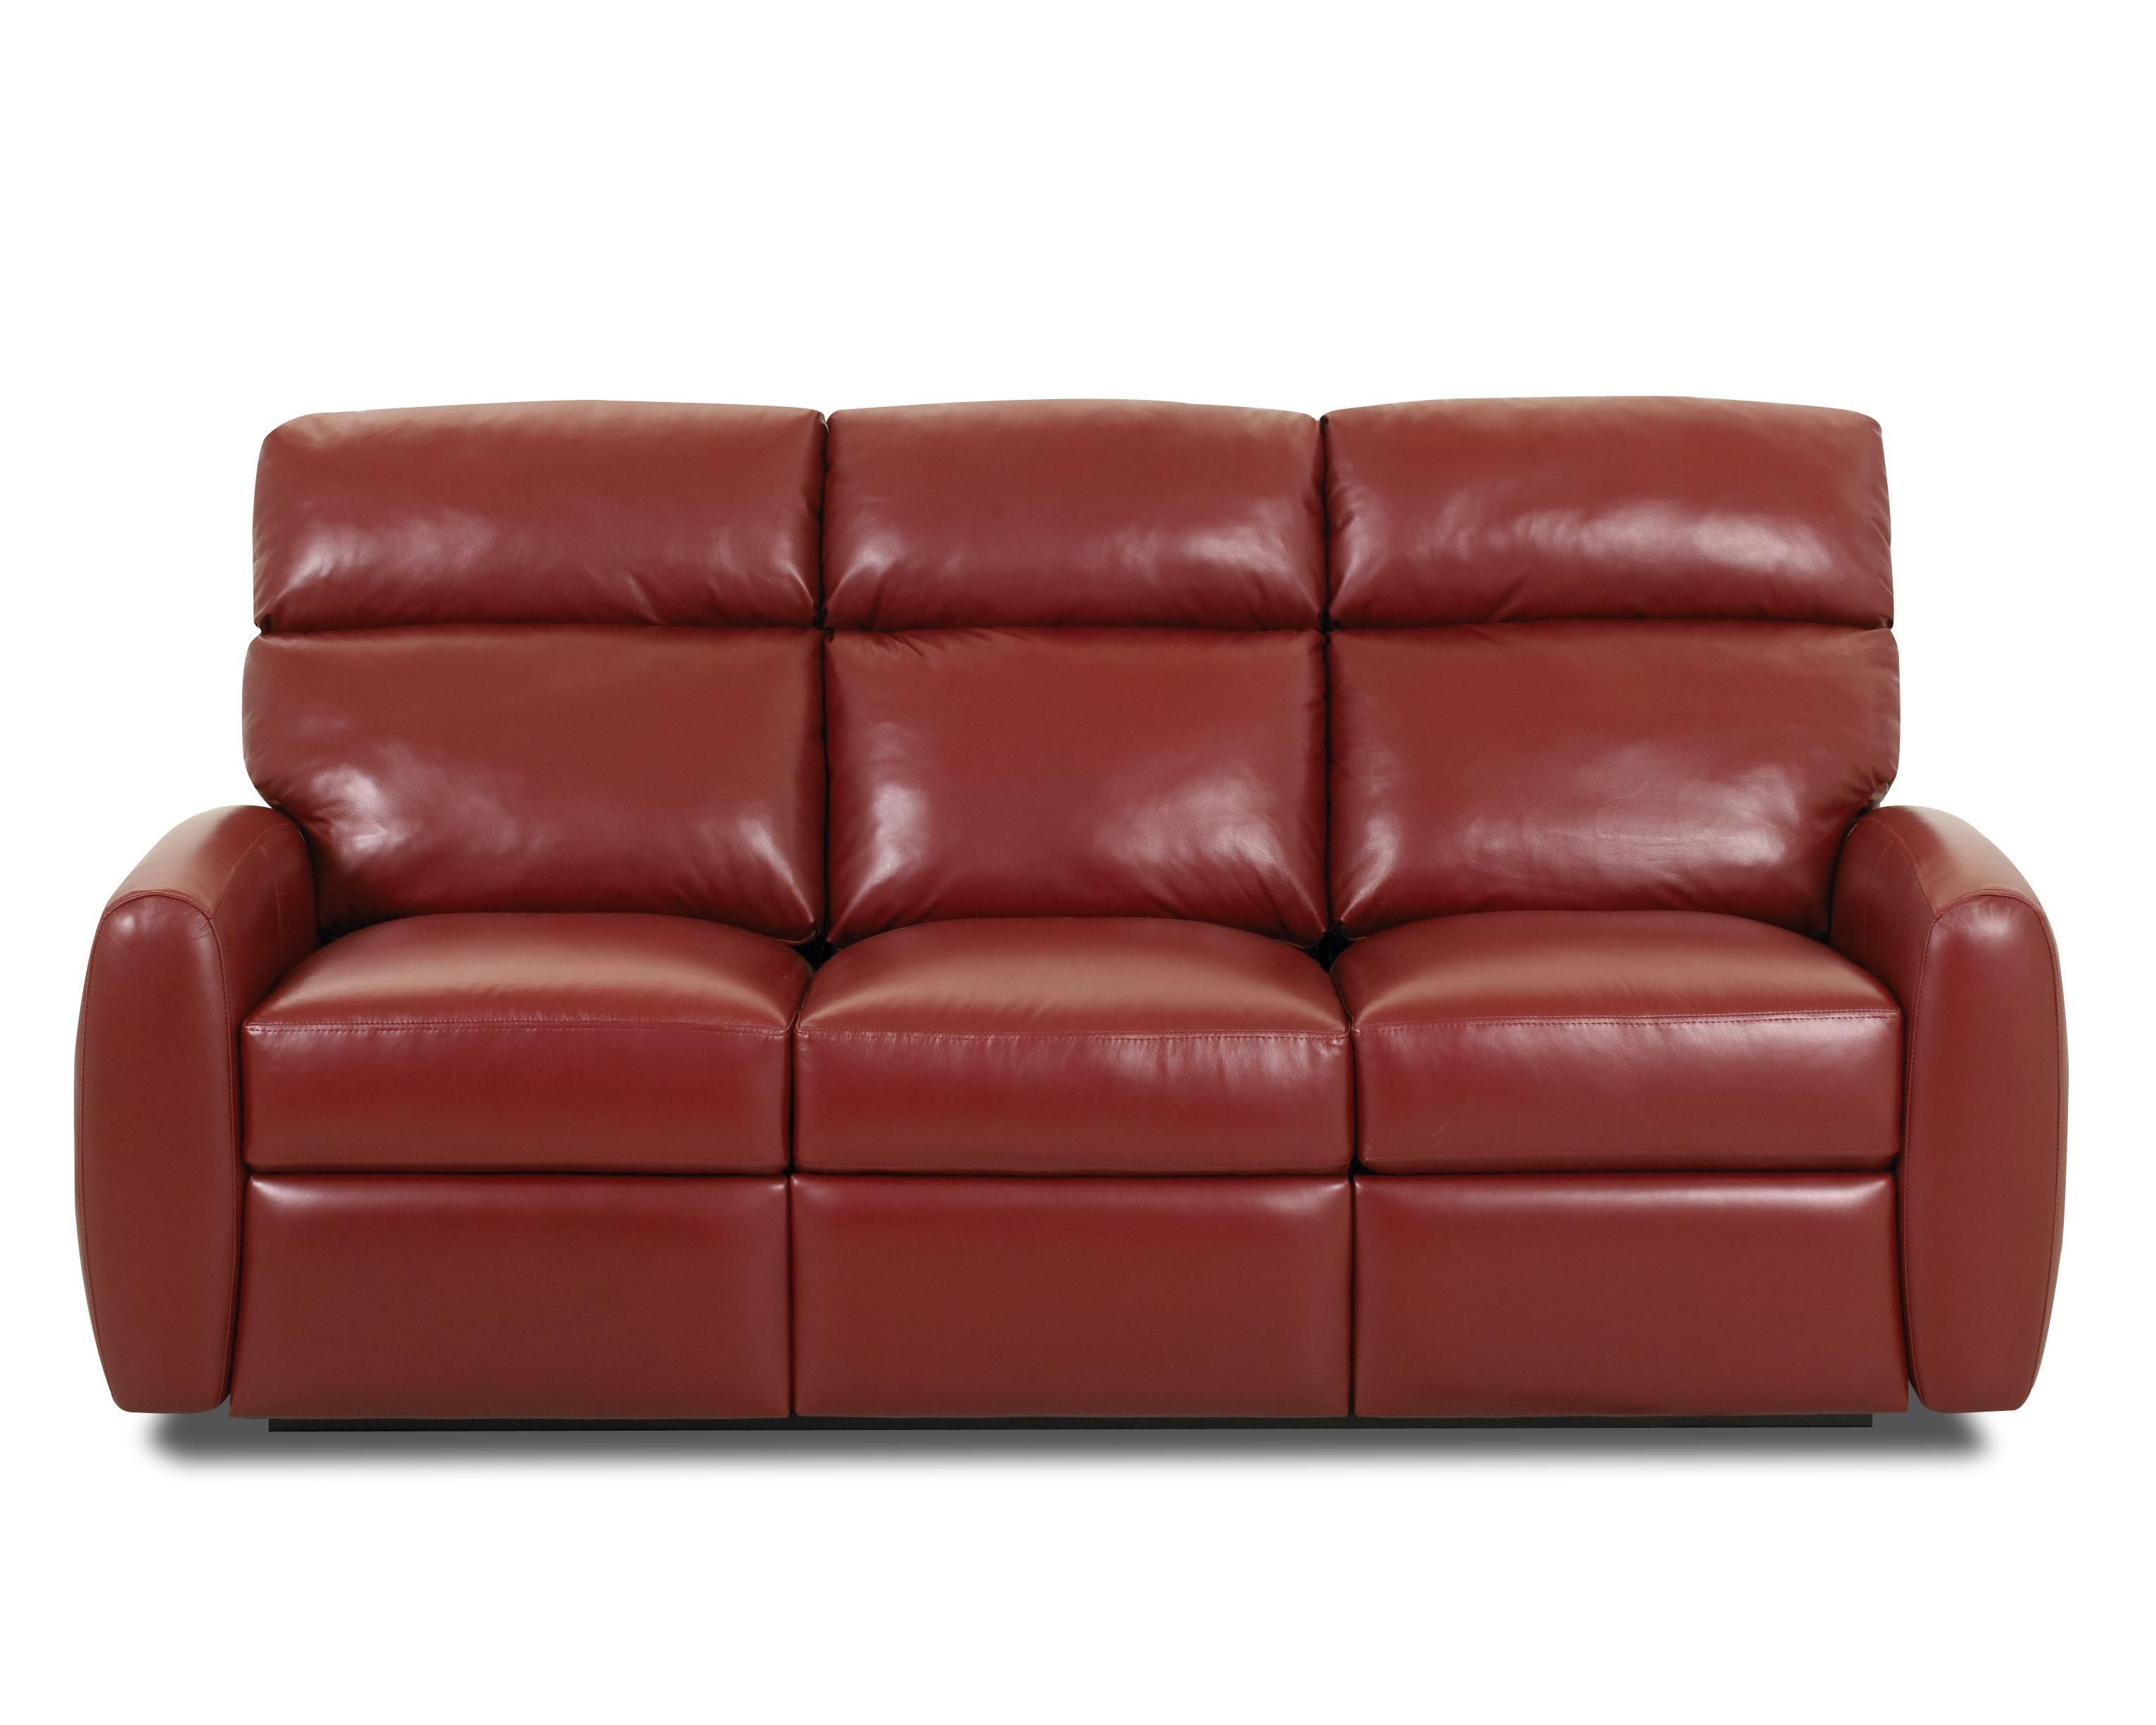 Comfort Design Ventana Red Leather Recliner Sofa City Creek Furniture Pertaining To Red Leather Reclining Sofas And Loveseats 